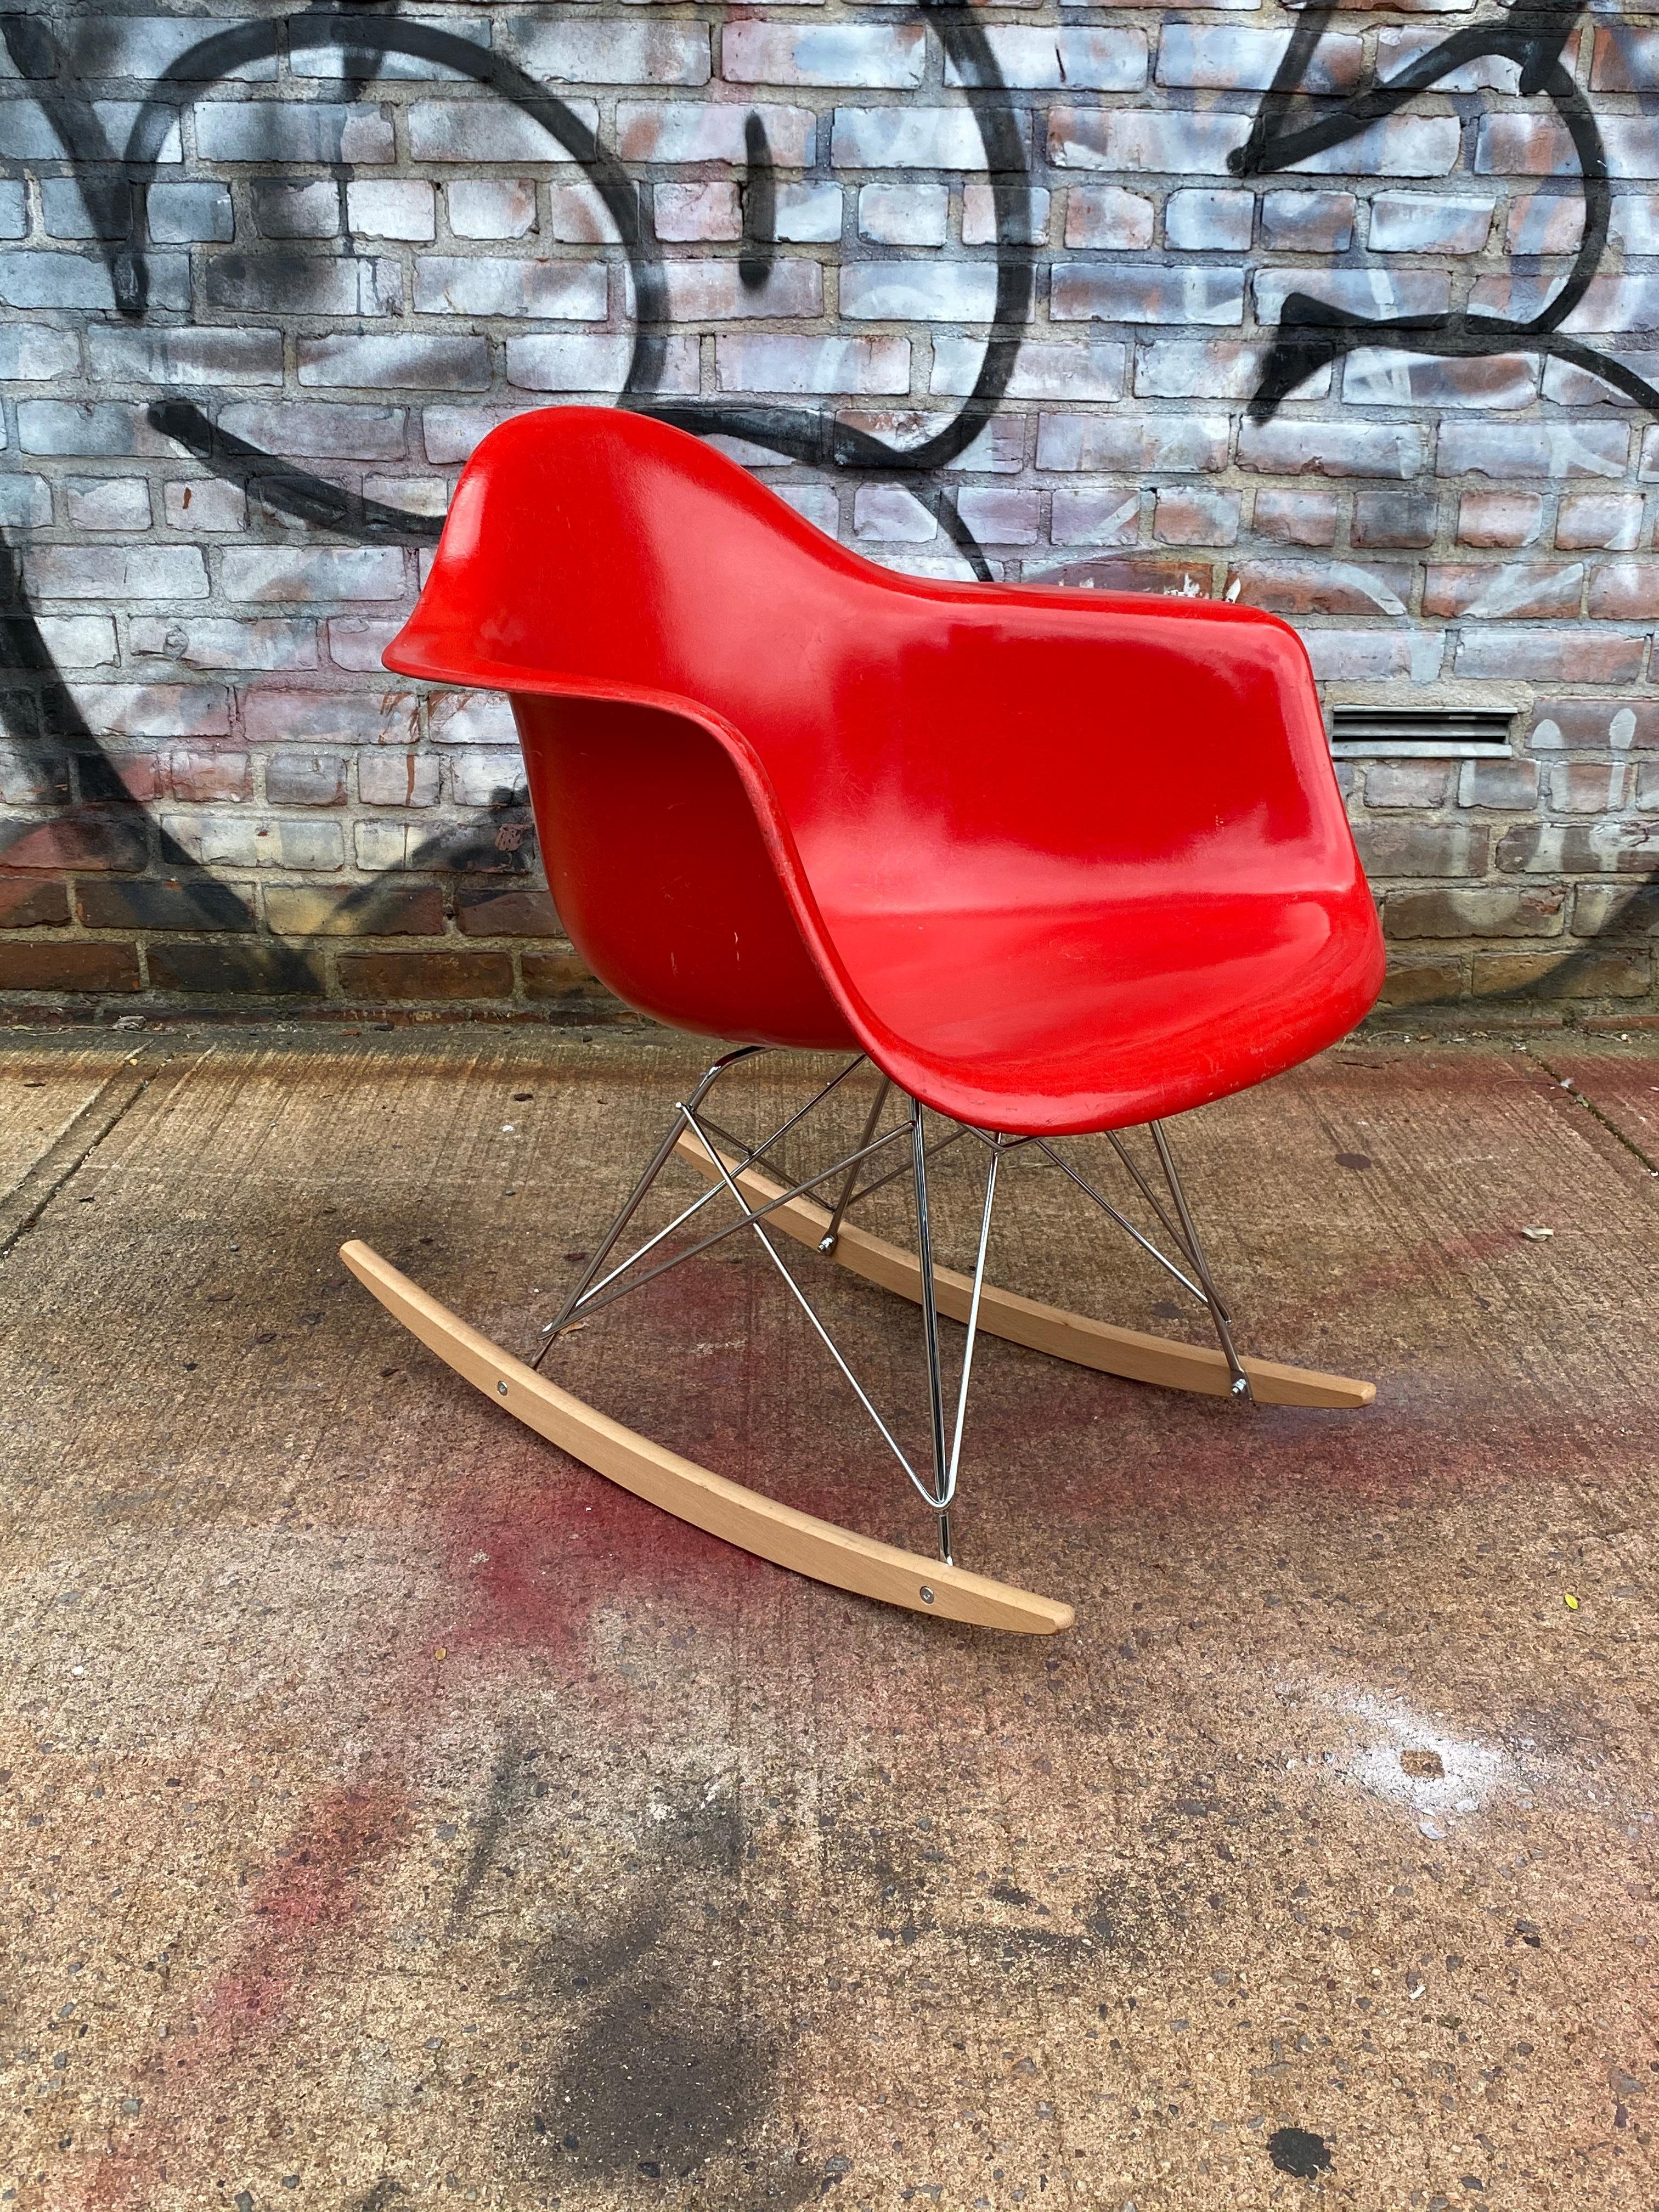 Bright and bold example of the classic design icon. This Eames rocker features a cherry red fiberglass shell, signed Hermon Miller and guaranteed authentic. It presents in very good vintage condition with no breaks. Base comprised of light wood